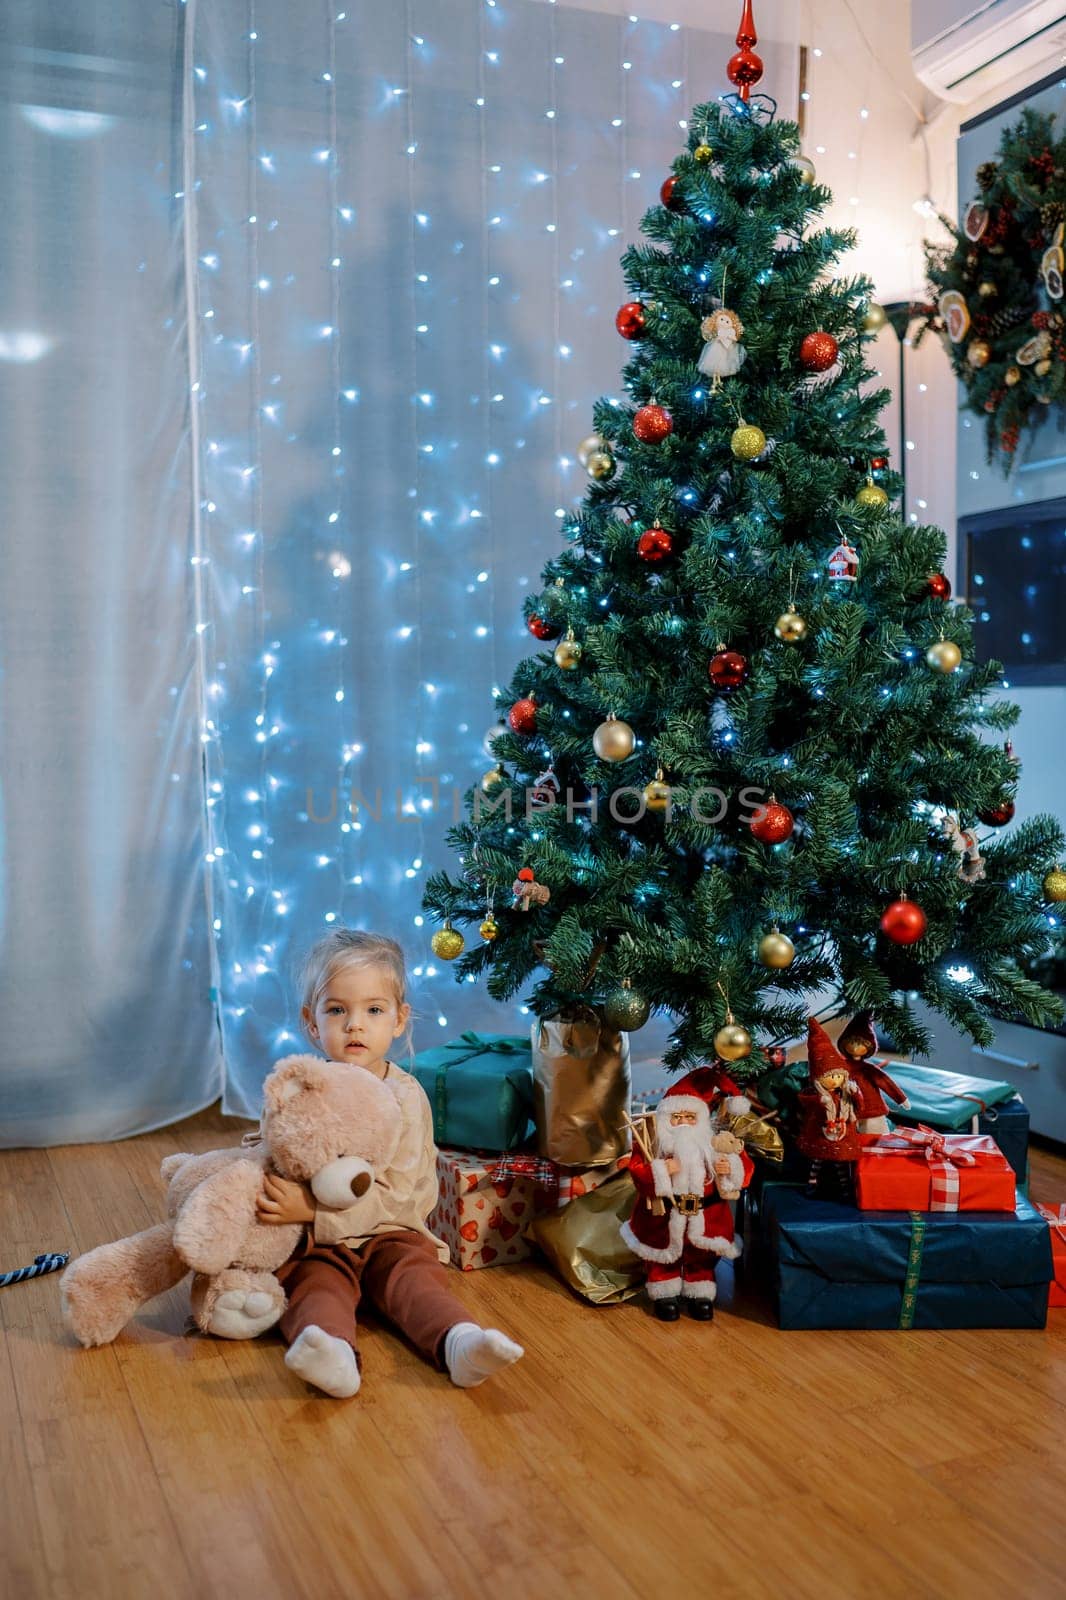 Little girl with a teddy bear sits on the floor next to gifts under the Christmas tree. High quality photo